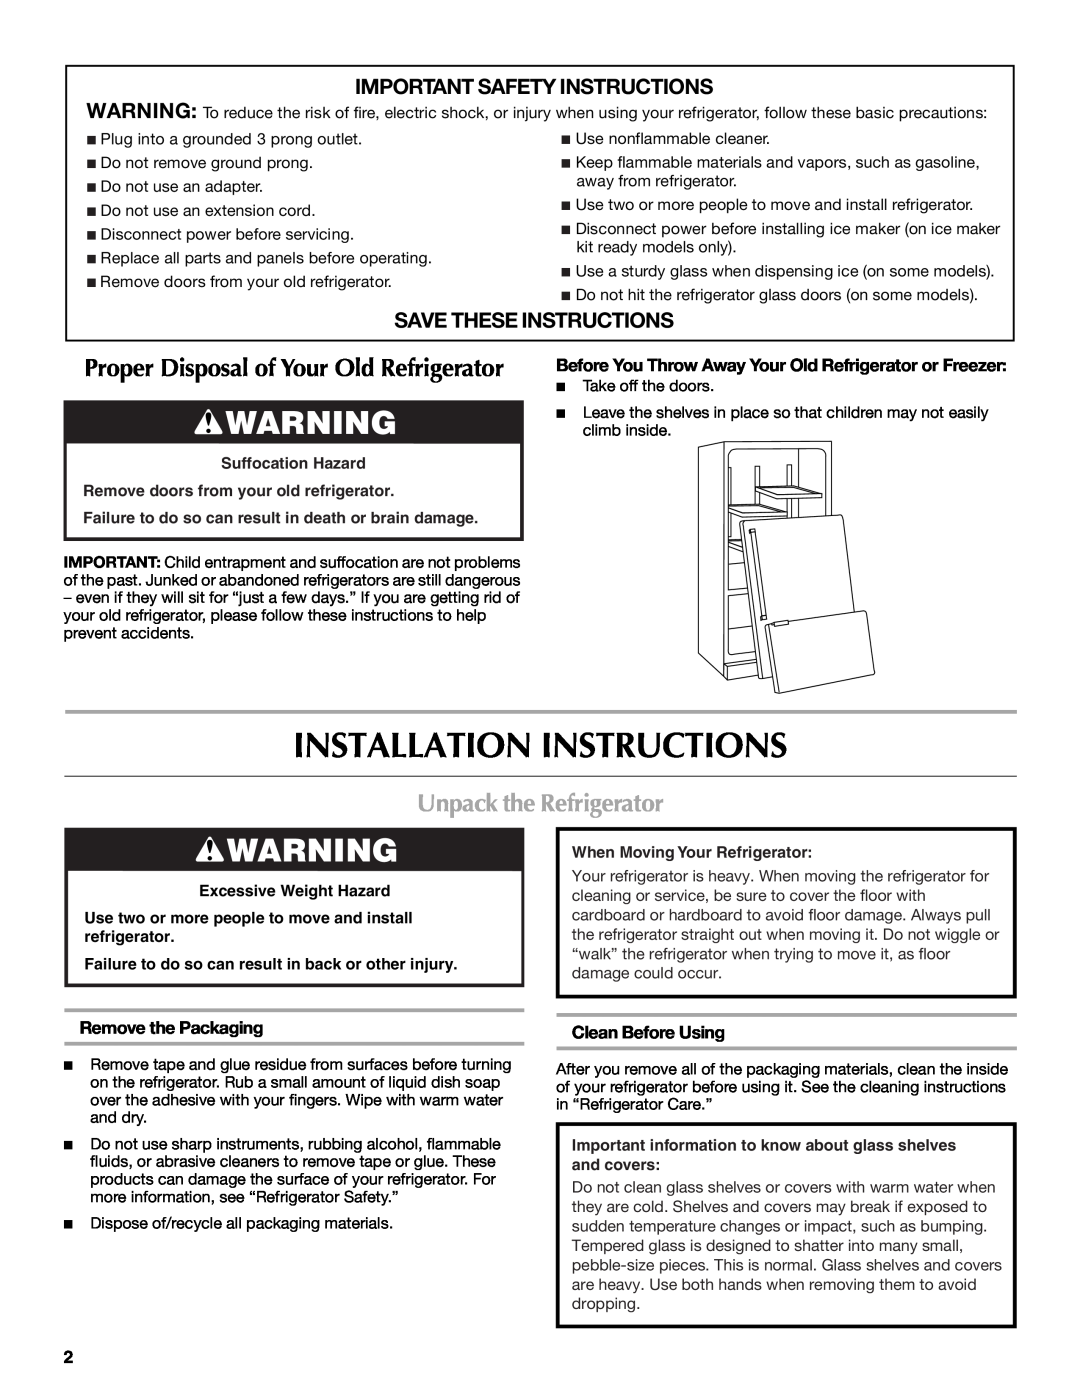 Maytag UKF8001AXX-200 Installation Instructions, Unpack the Refrigerator, Important Safety Instructions 